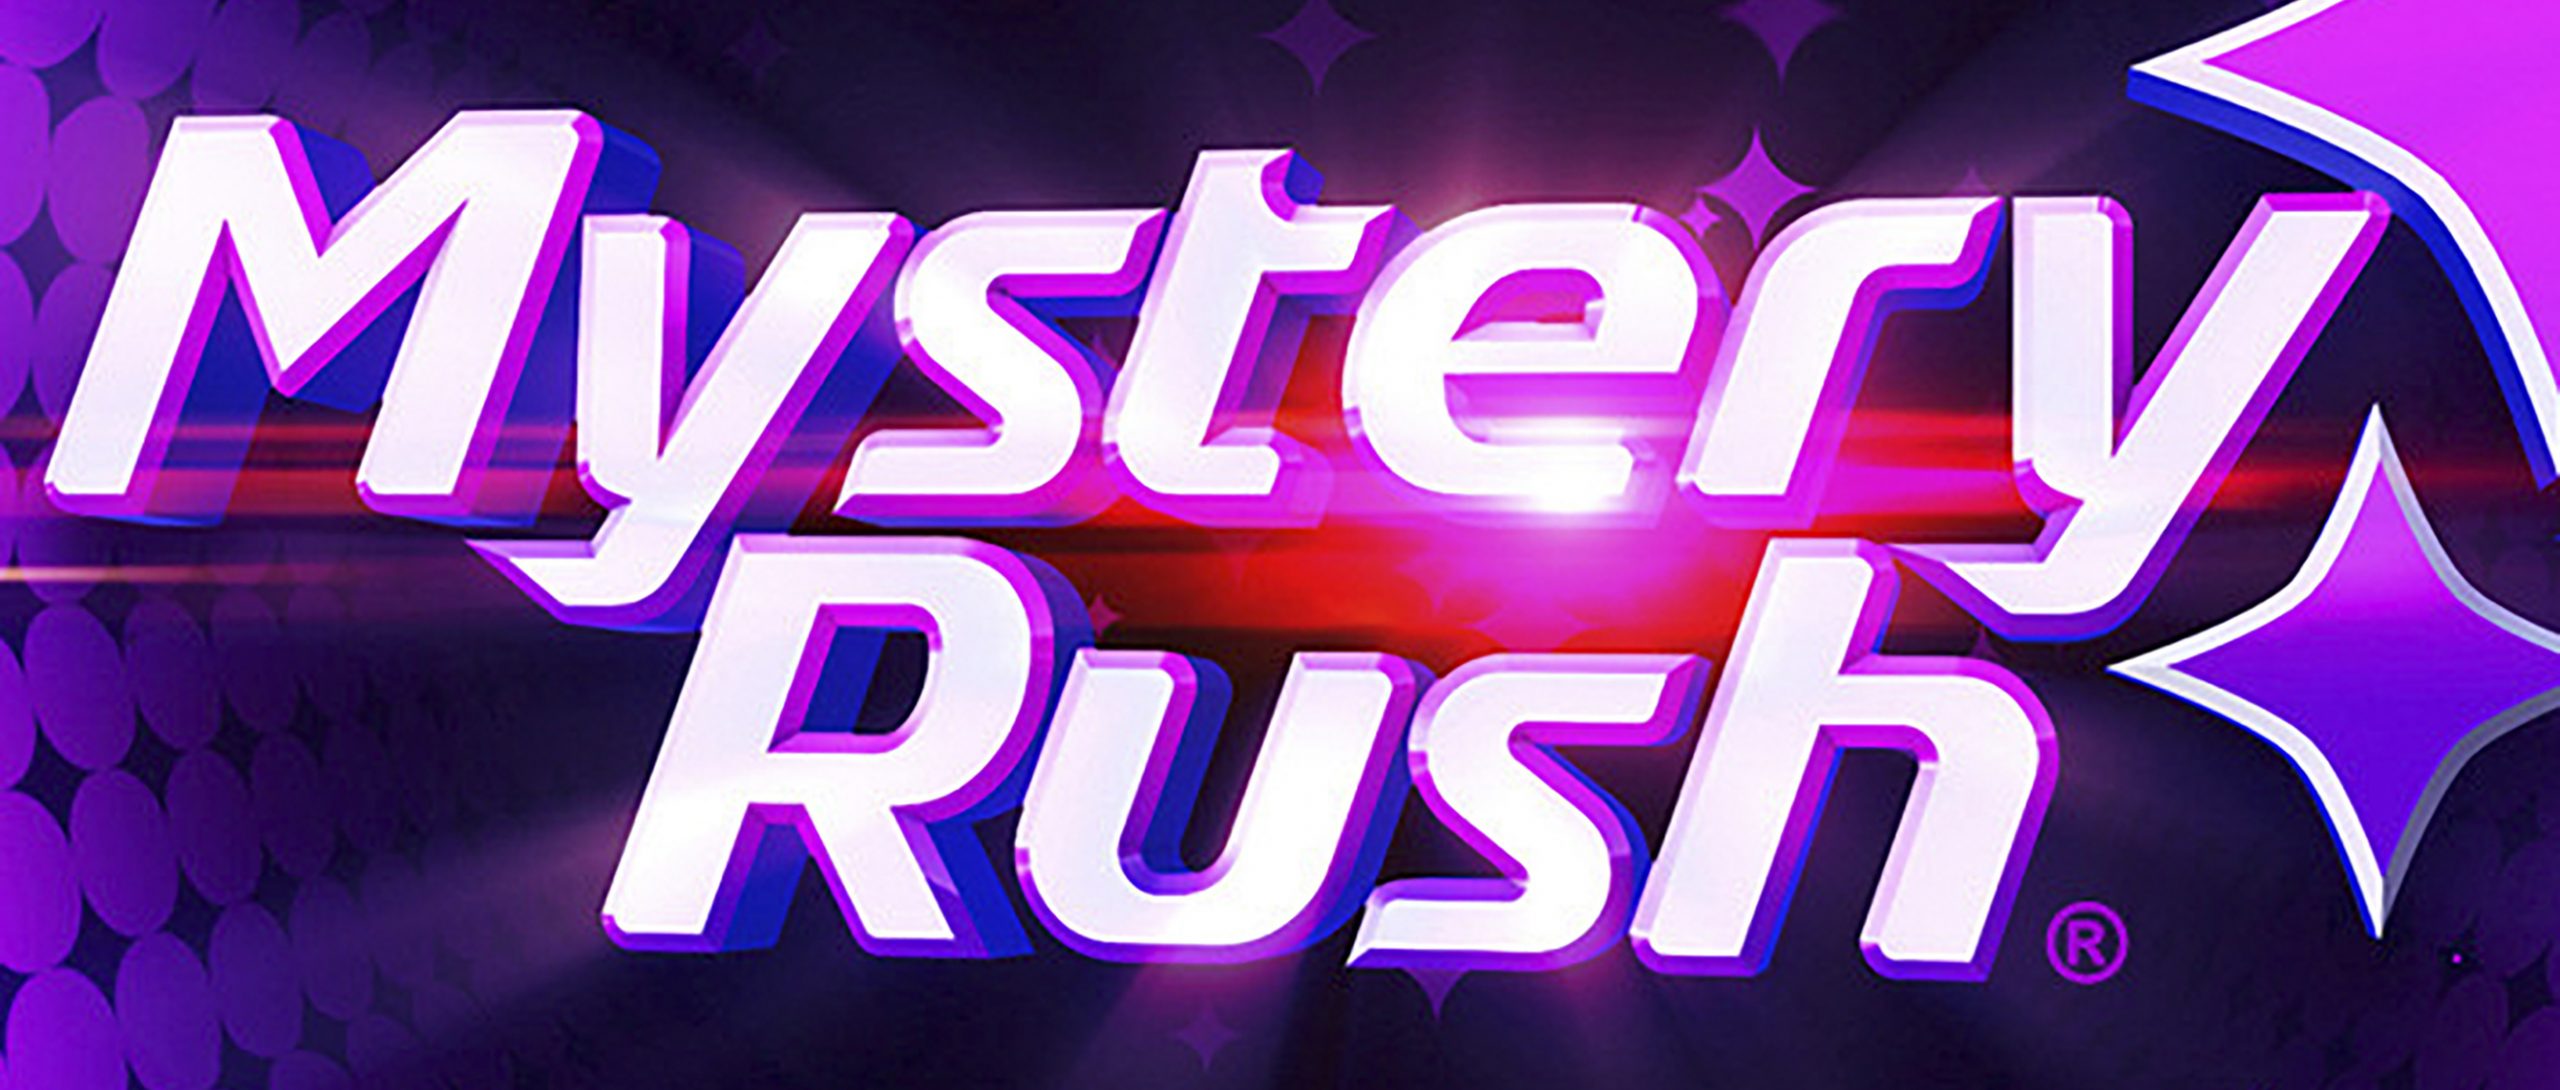 The fasted & brightest dice slot on betFIRST Casino is Mystery Rush